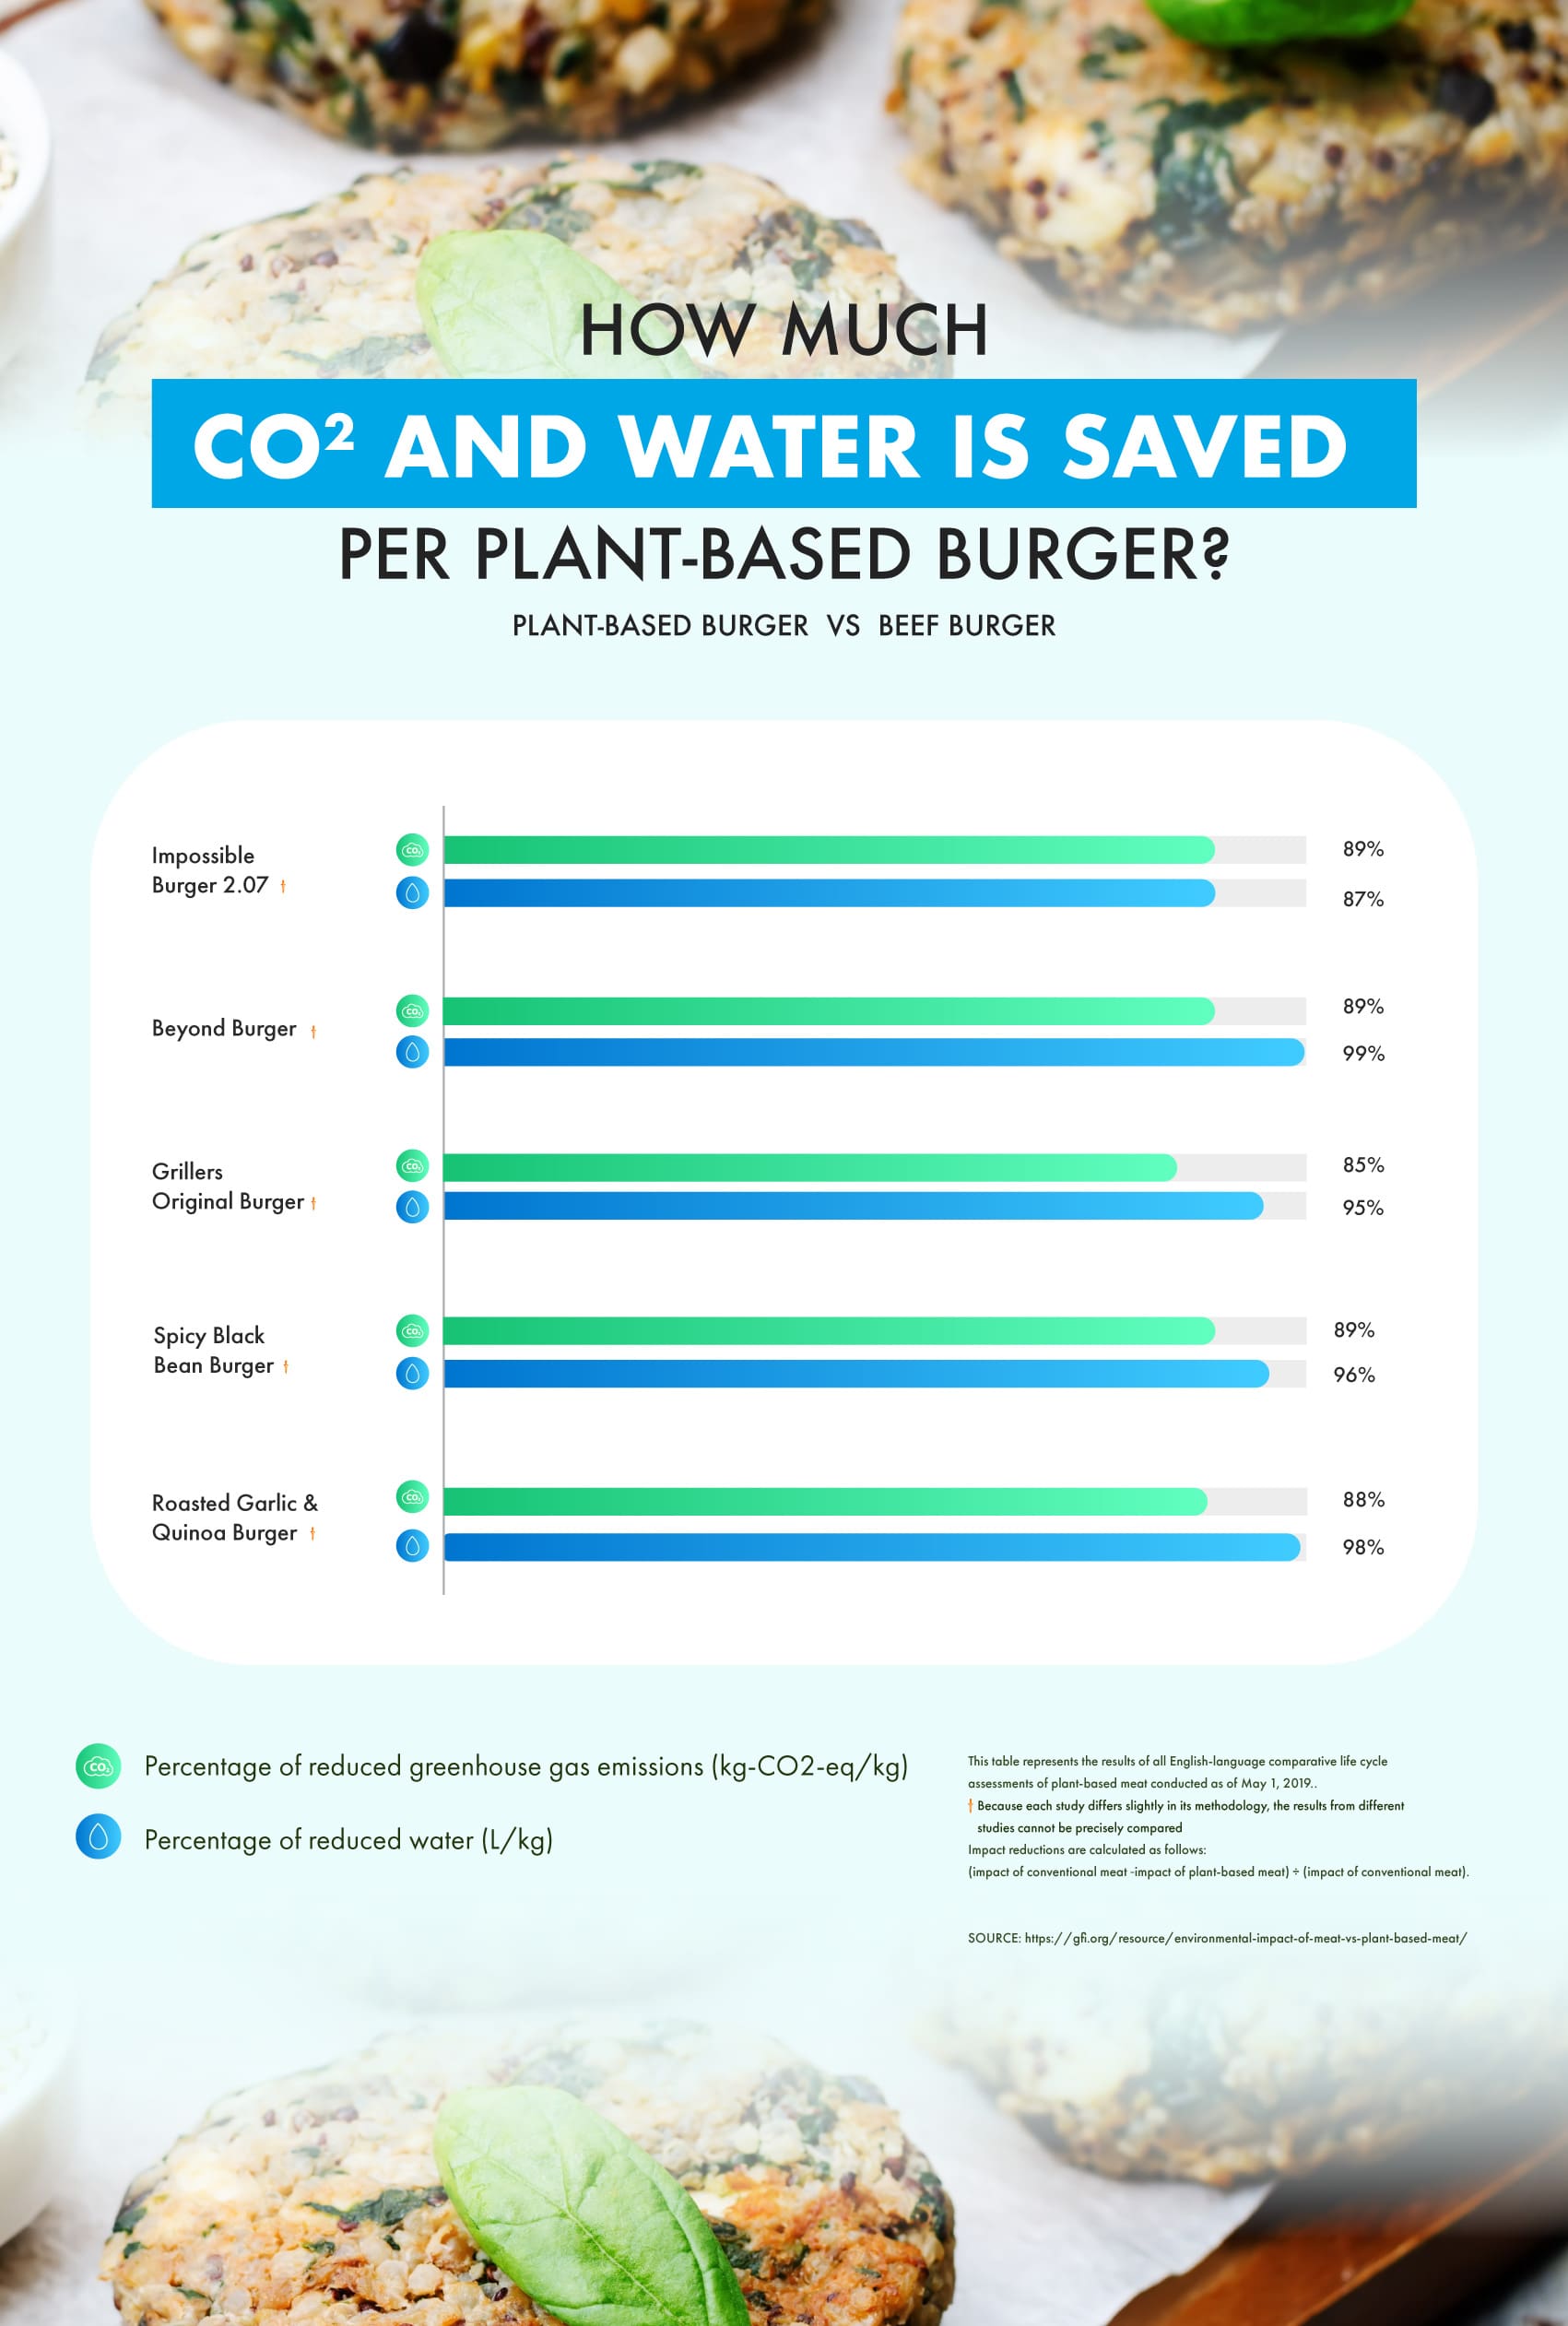 CO2 and water saved per plant based burger